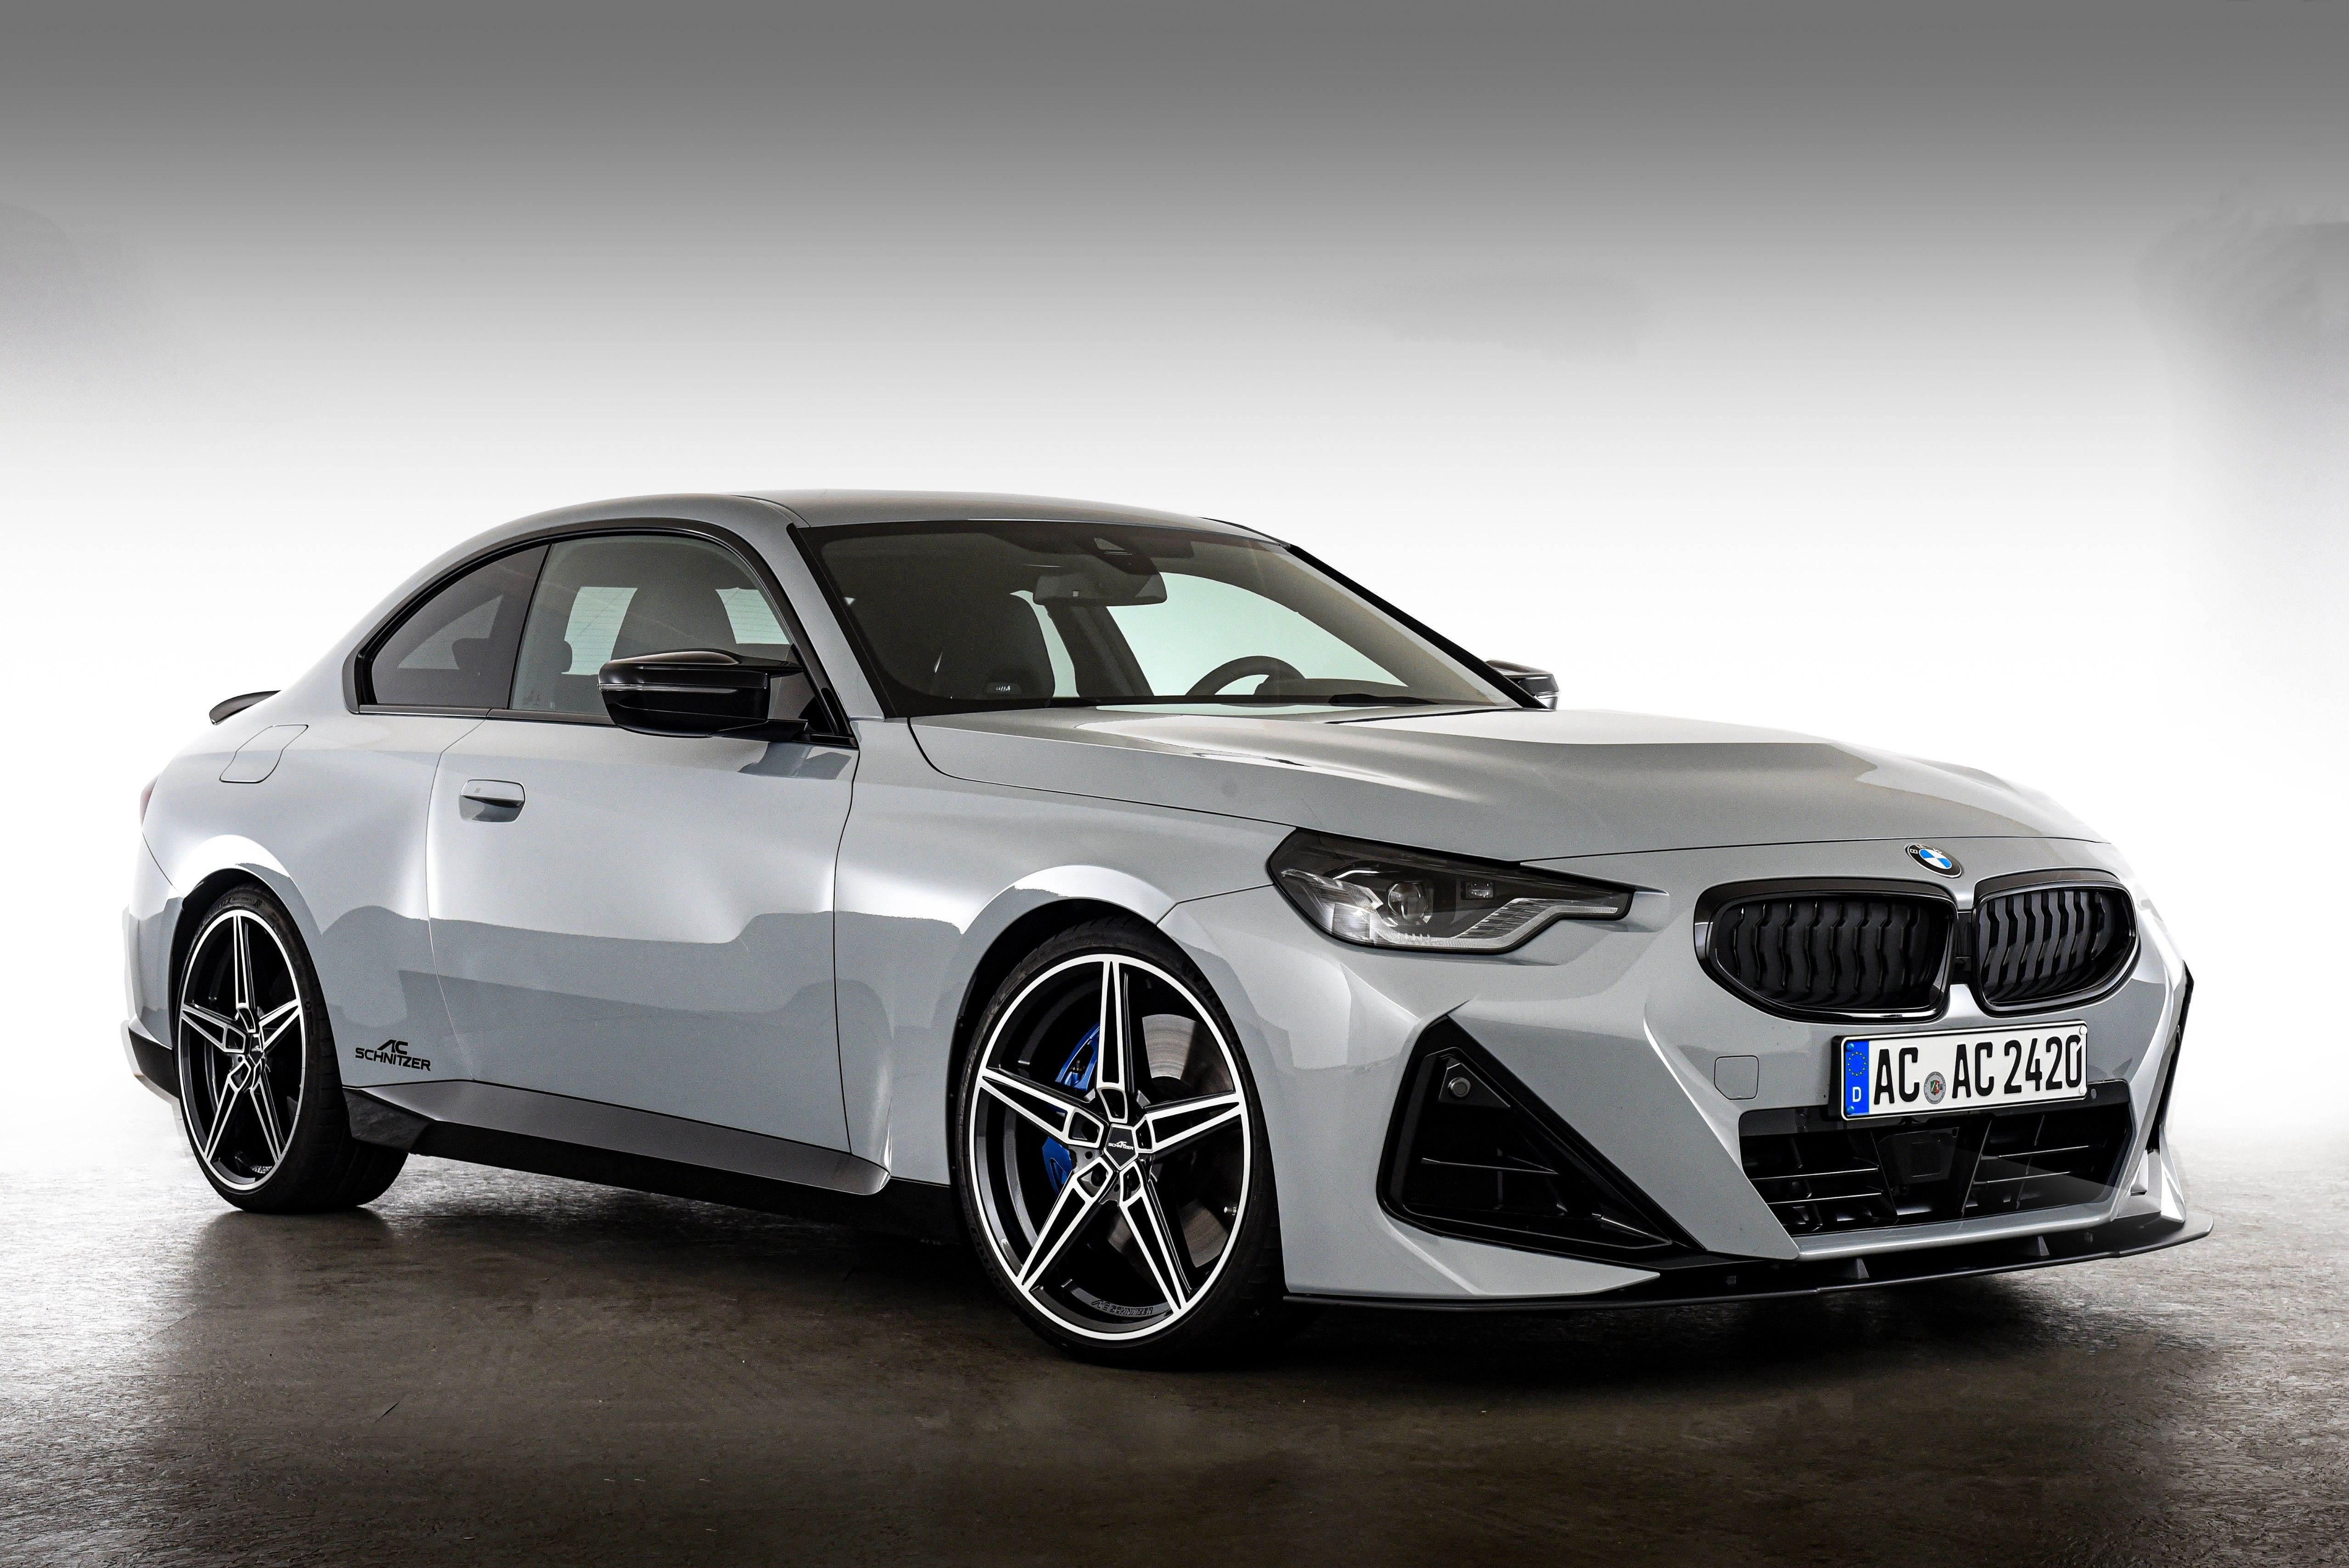 AC Schnitzer-Tuned M240i Performance Upped in Subtle Ways